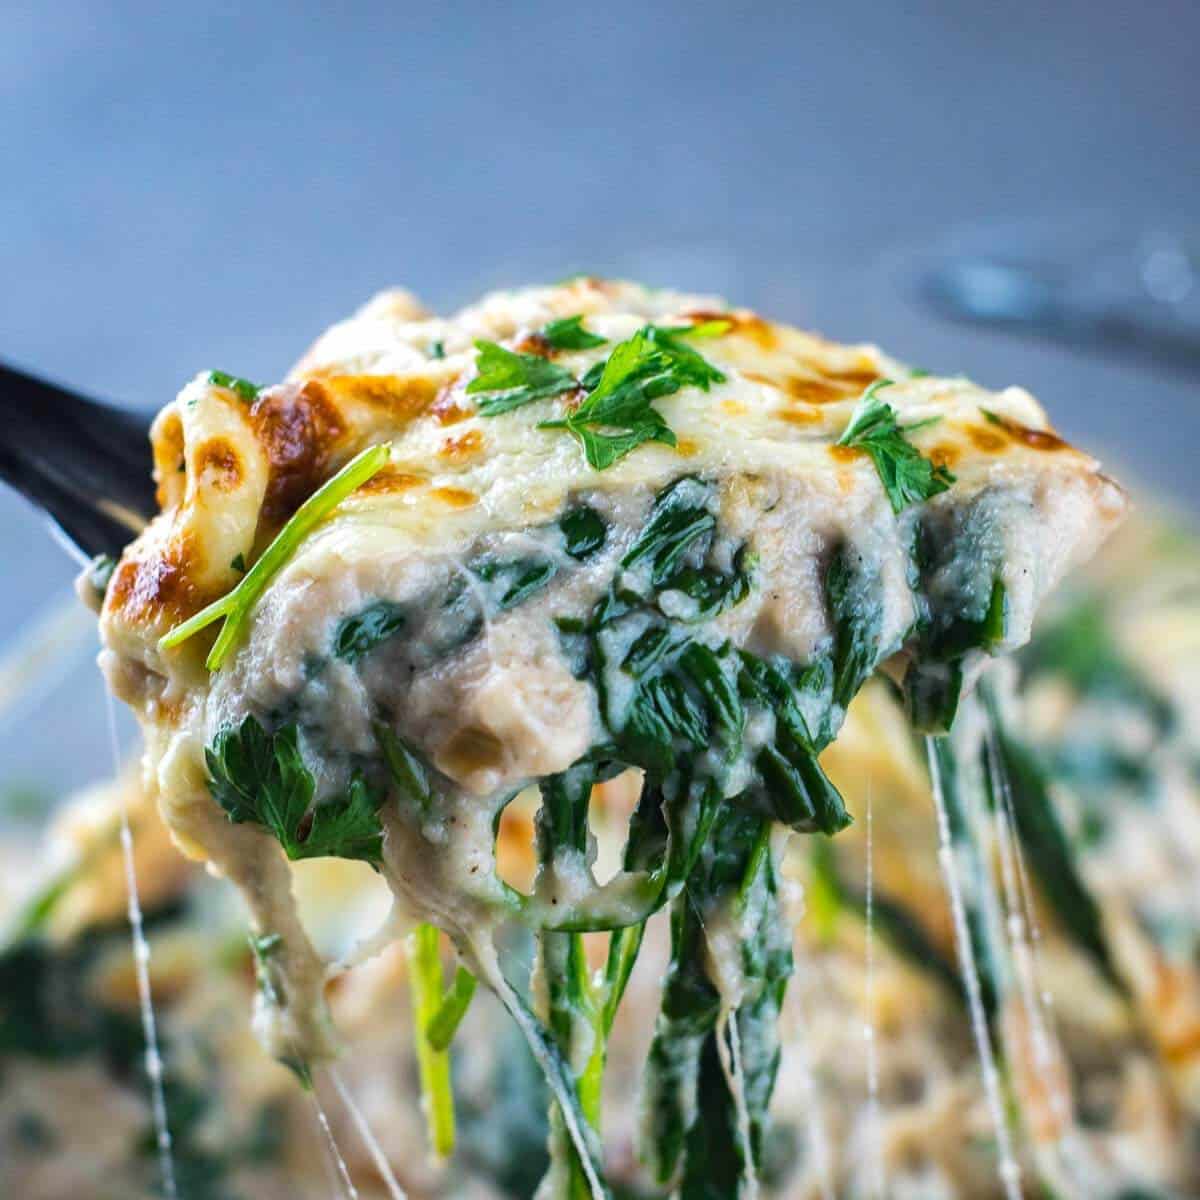 A scoop of cauliflower-creamed Spinach from the dish.